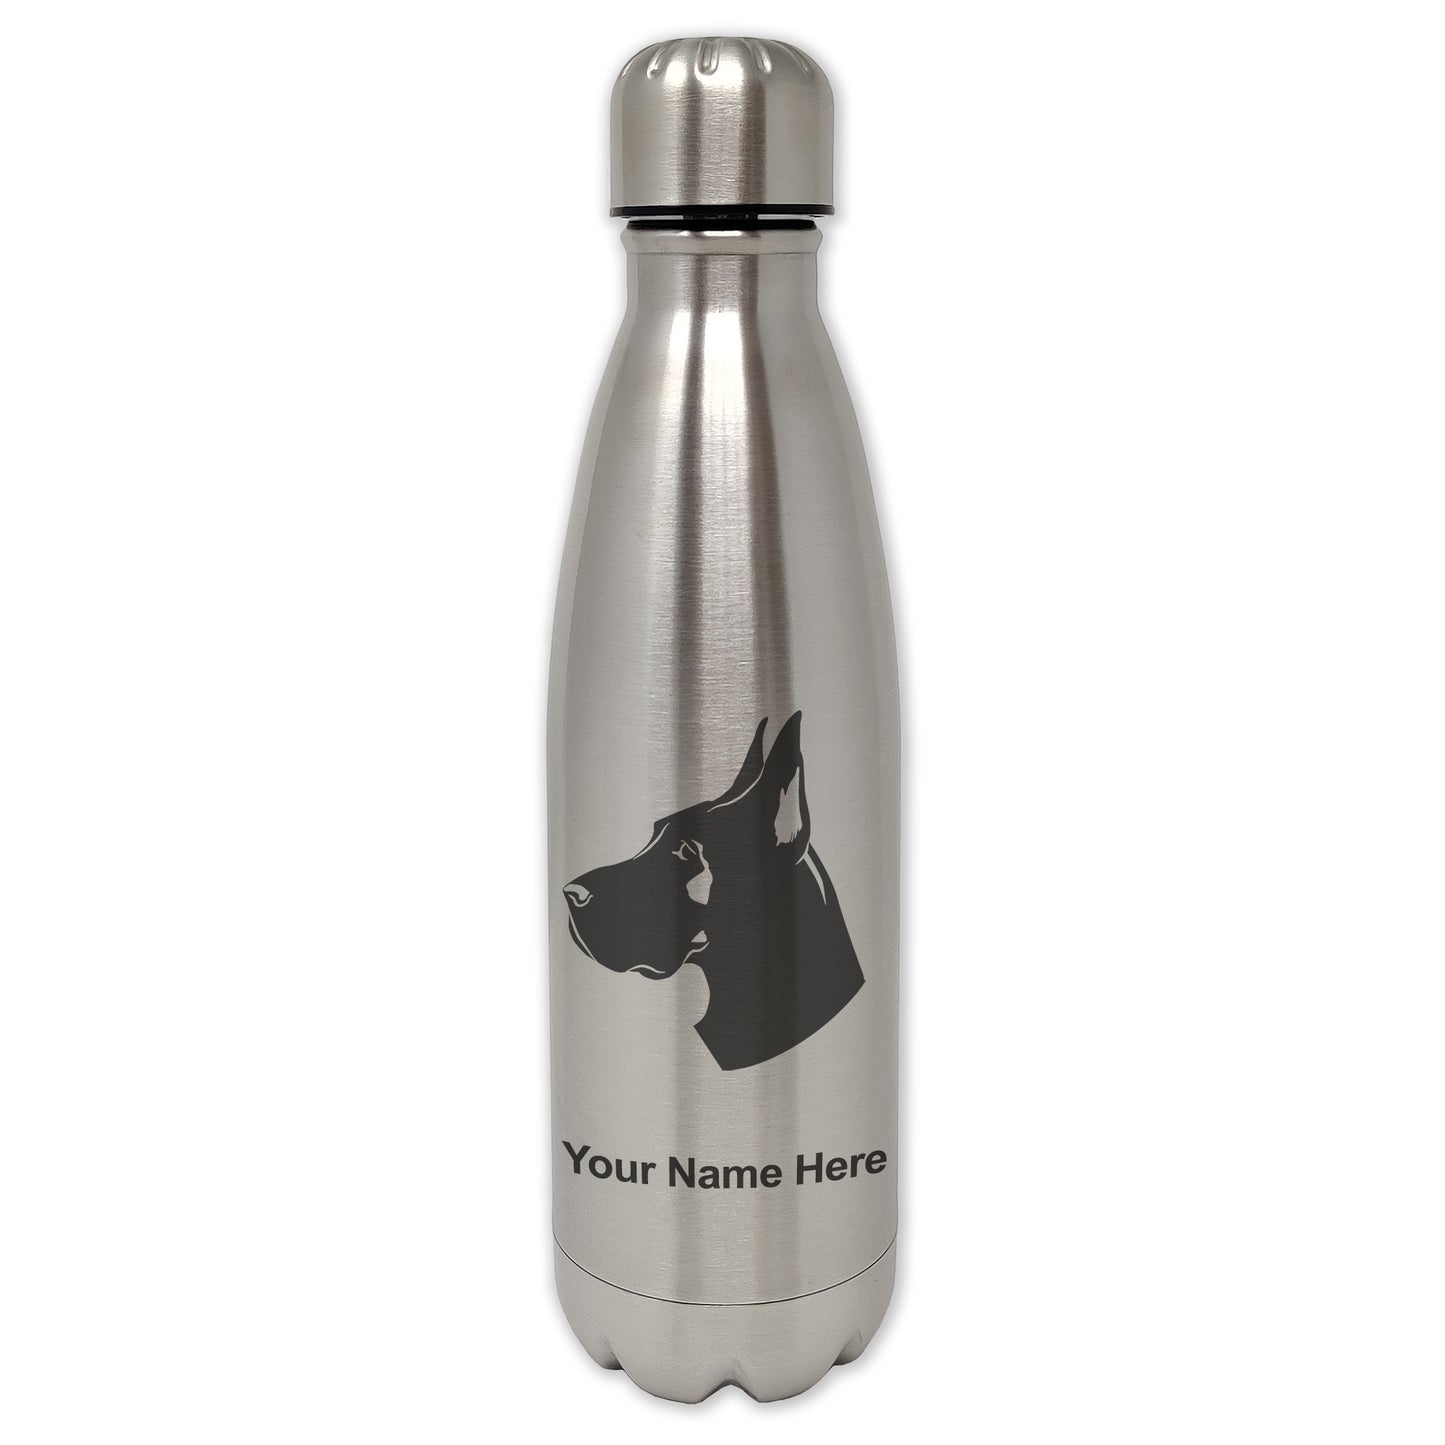 LaserGram Single Wall Water Bottle, Great Dane Dog, Personalized Engraving Included